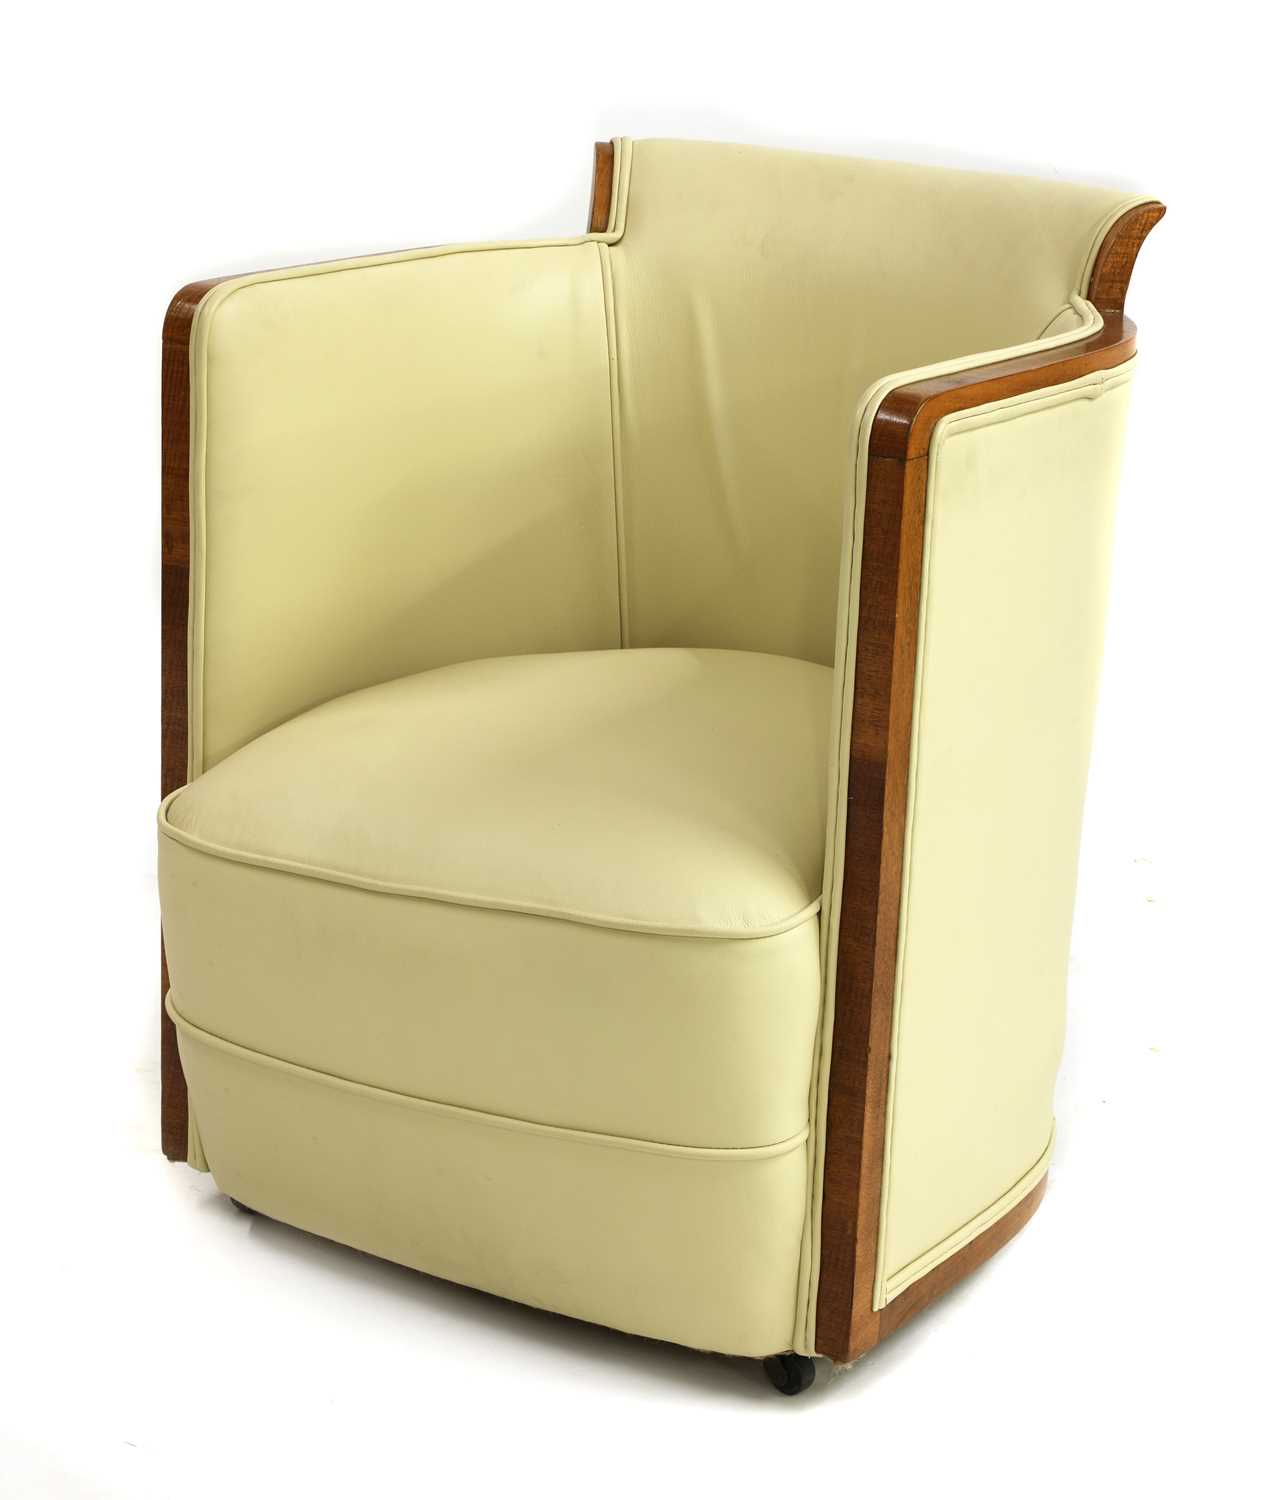 Lot 87 - An Art Deco walnut and cream leather lounge chair